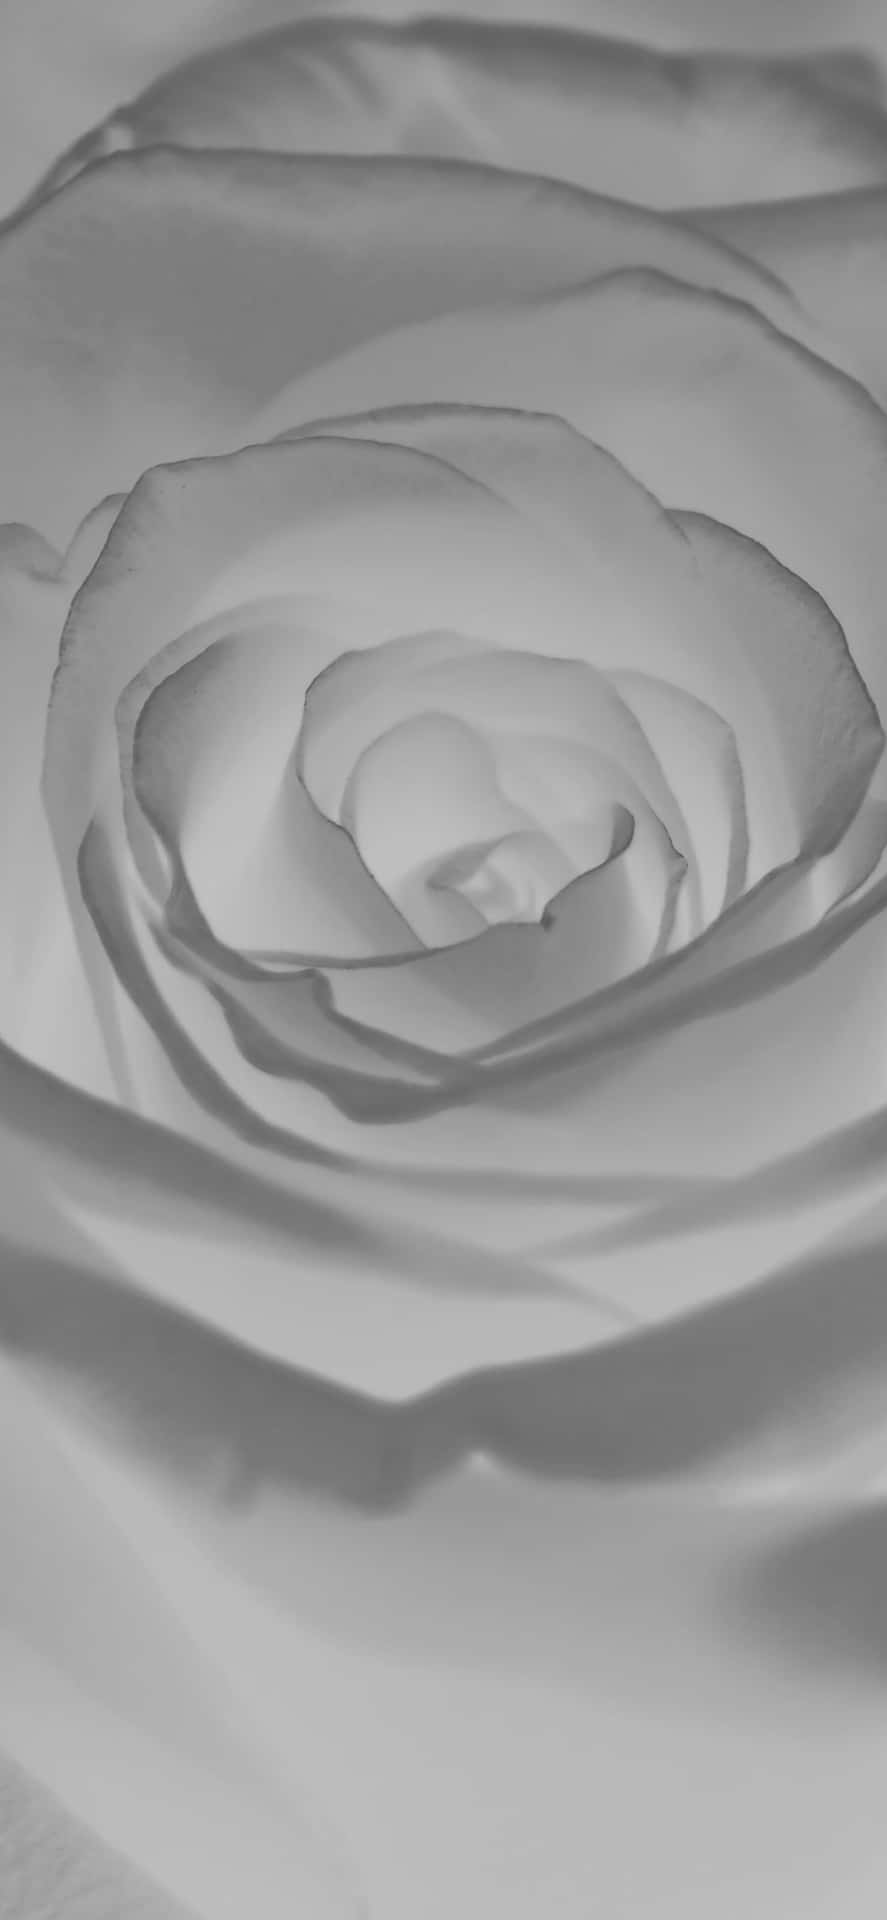 Black And White Rose Flower Iphone Wallpaper